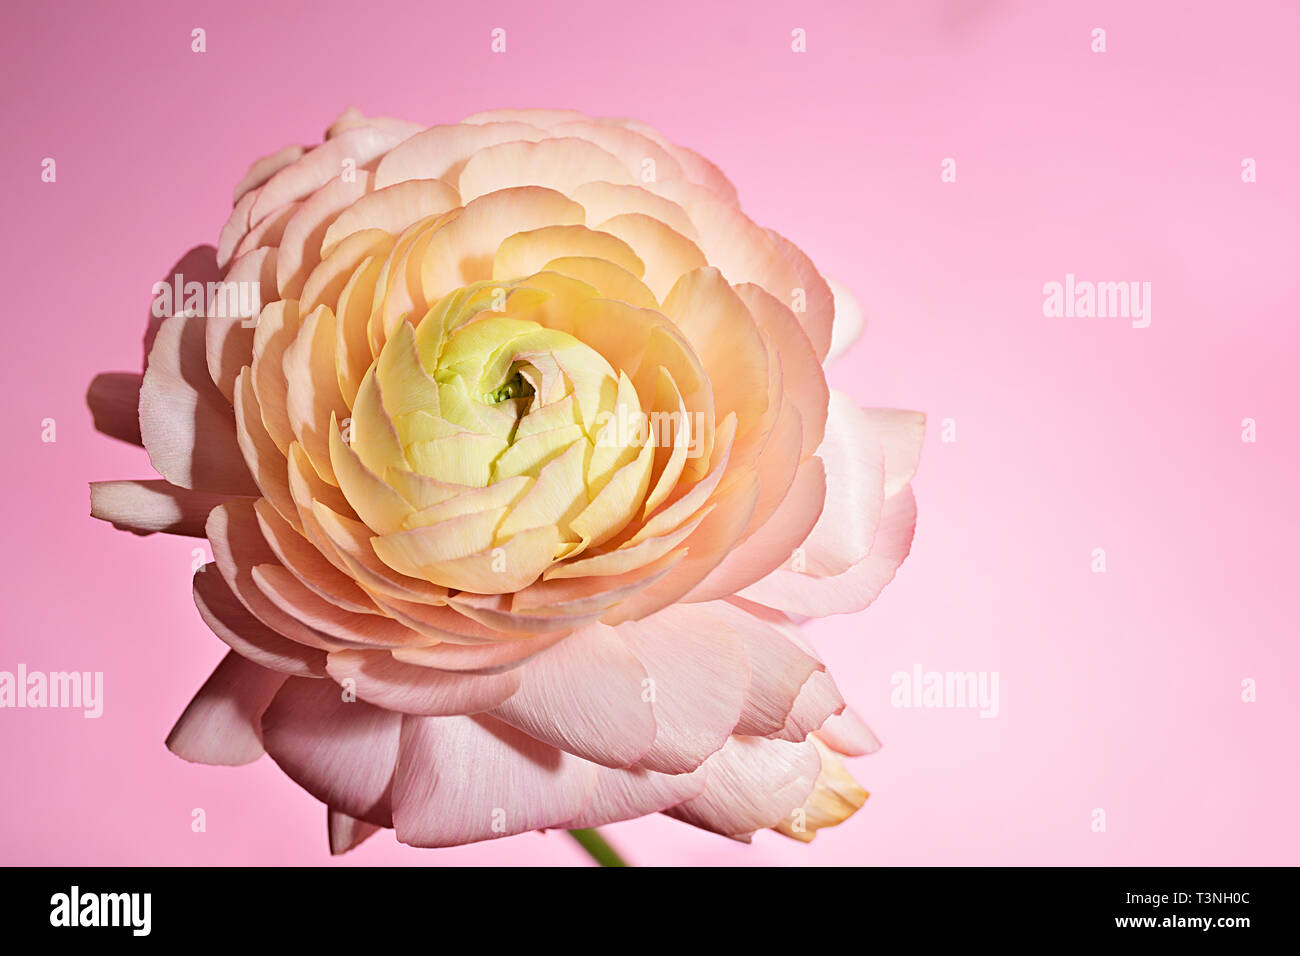 Flower ranunculaceae one on a one on a pink background. Stock Photo